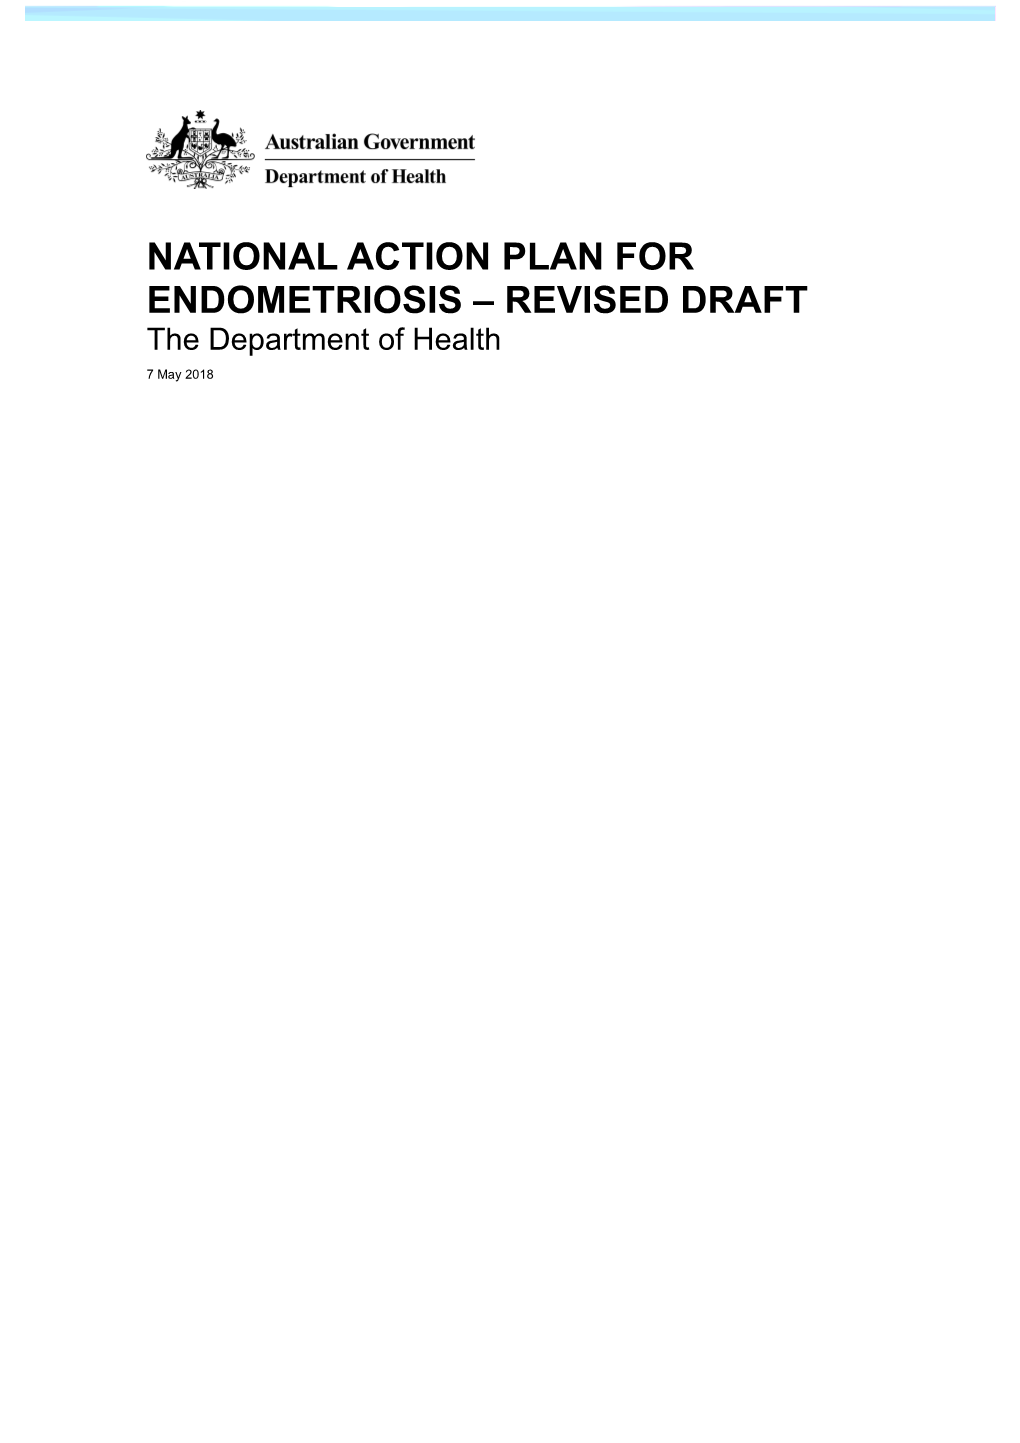 National Action Plan for Endometriosis Revised Draft